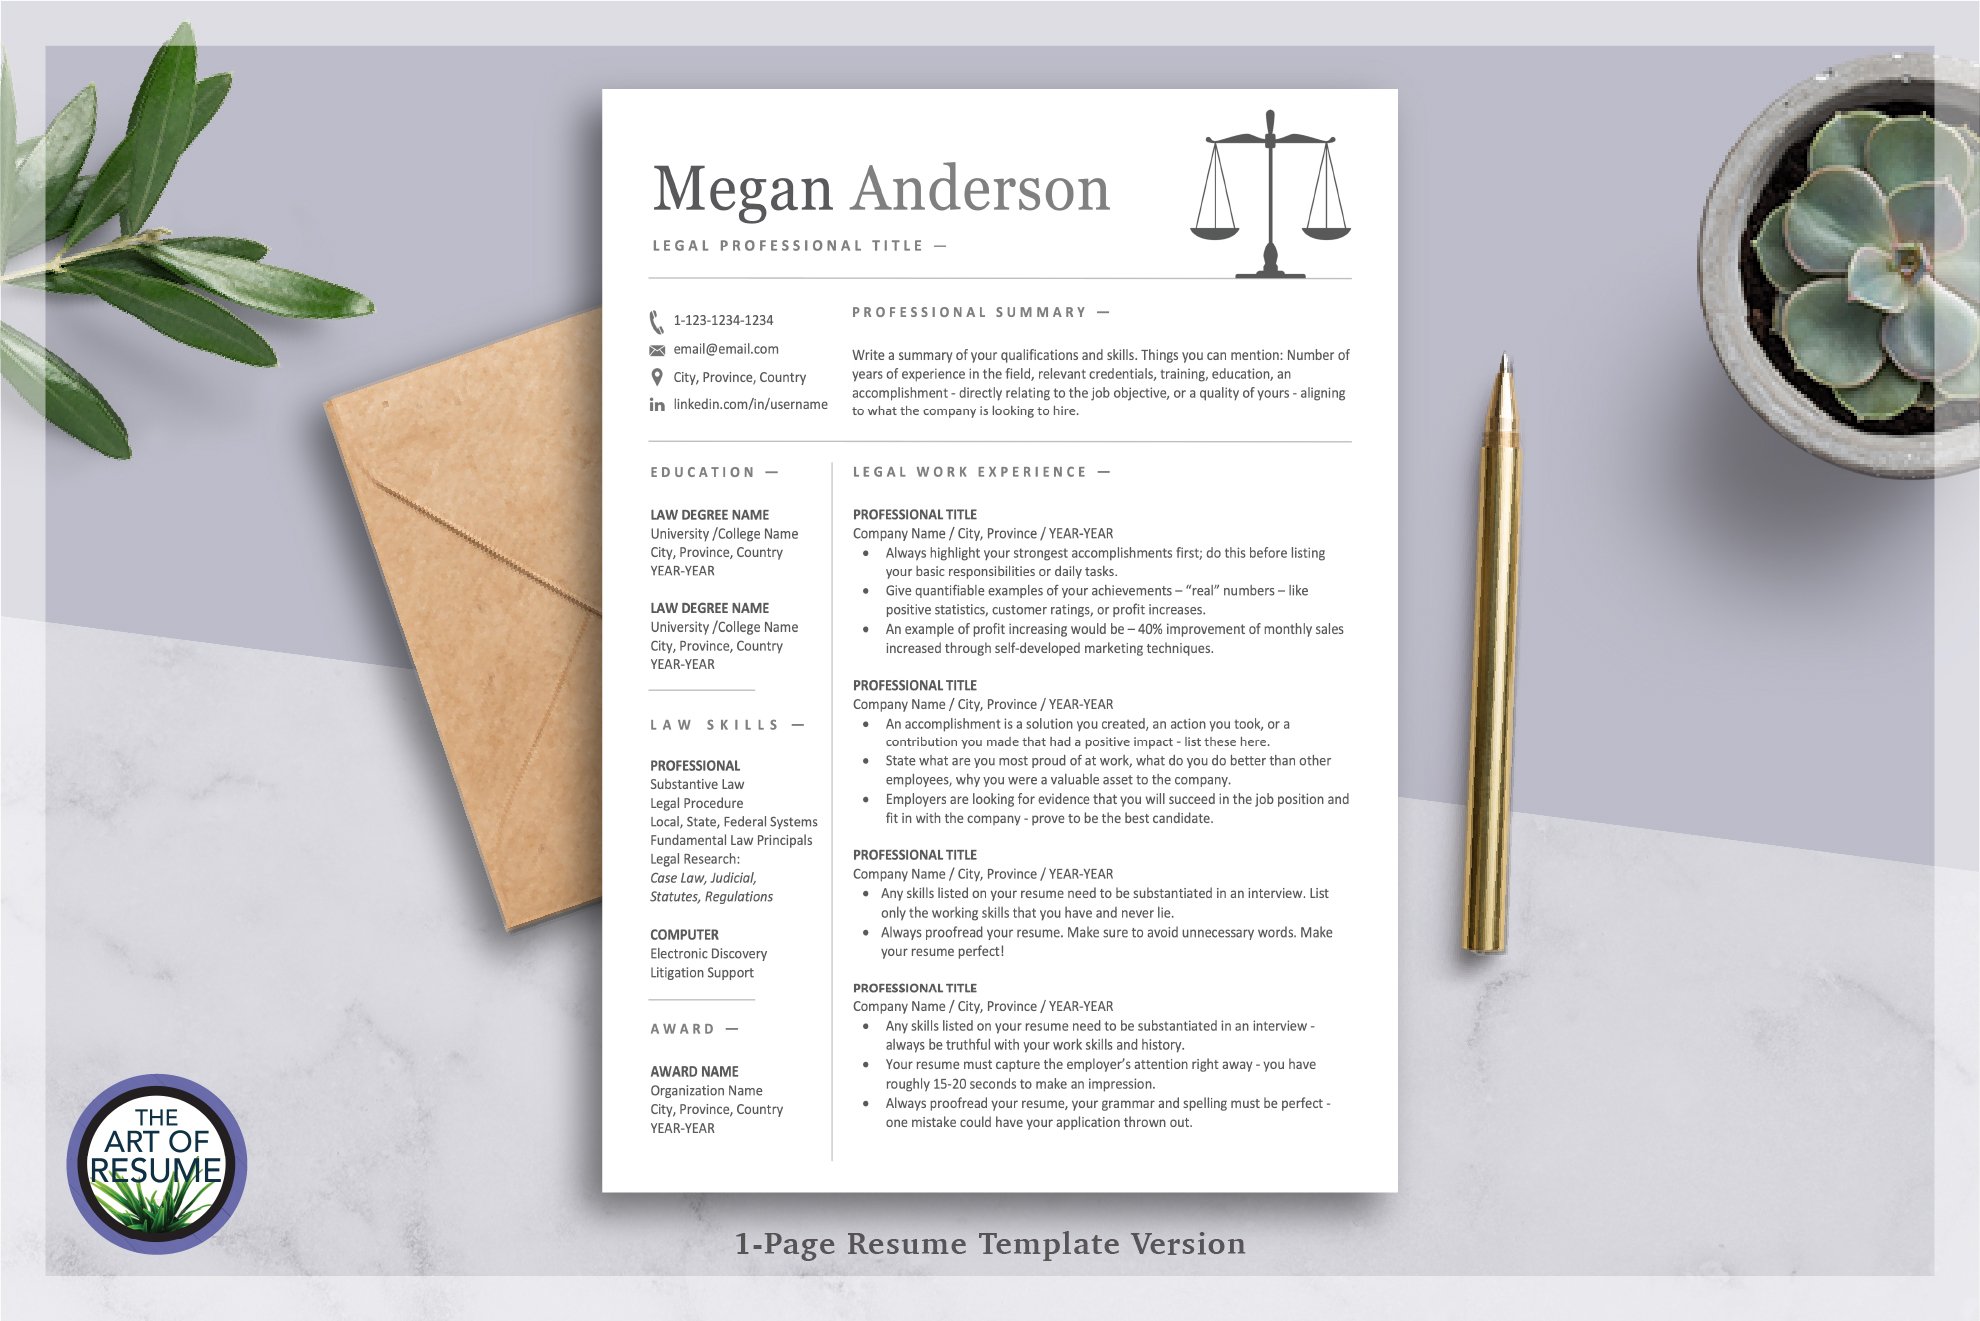 Legal Resume | Lawyer, Law Clerk CV preview image.